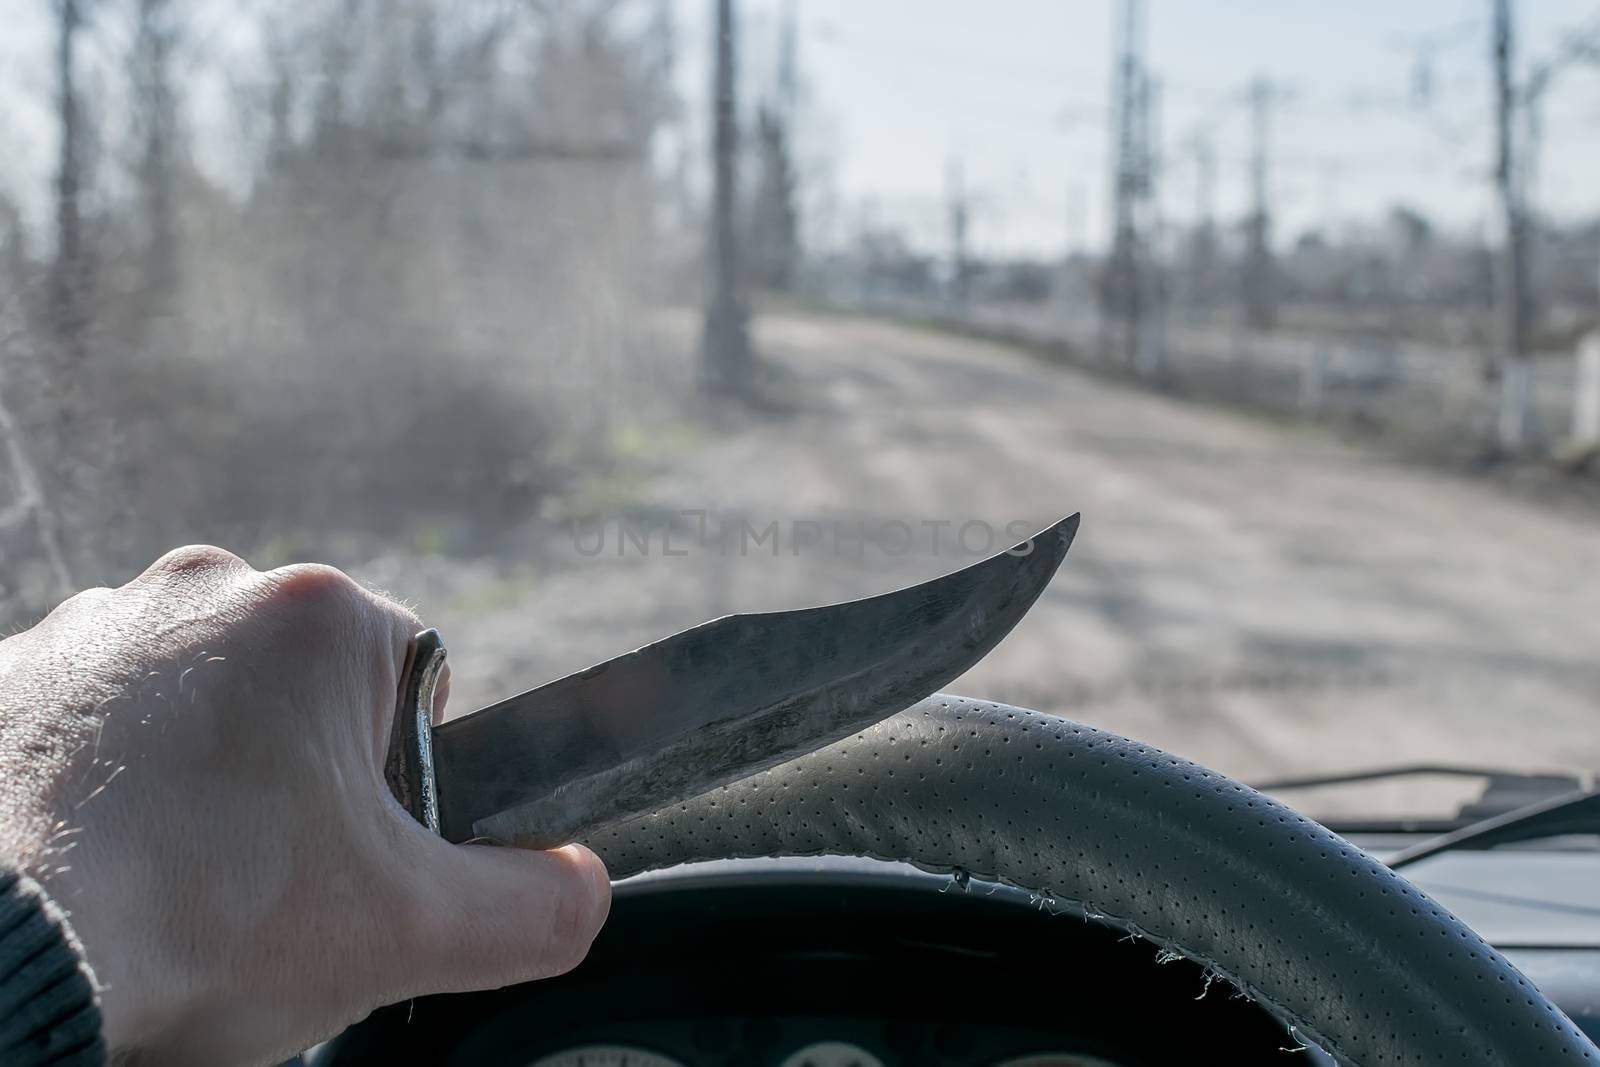 Crime, man, driving a car holding a knife, riding on the road by jk3030